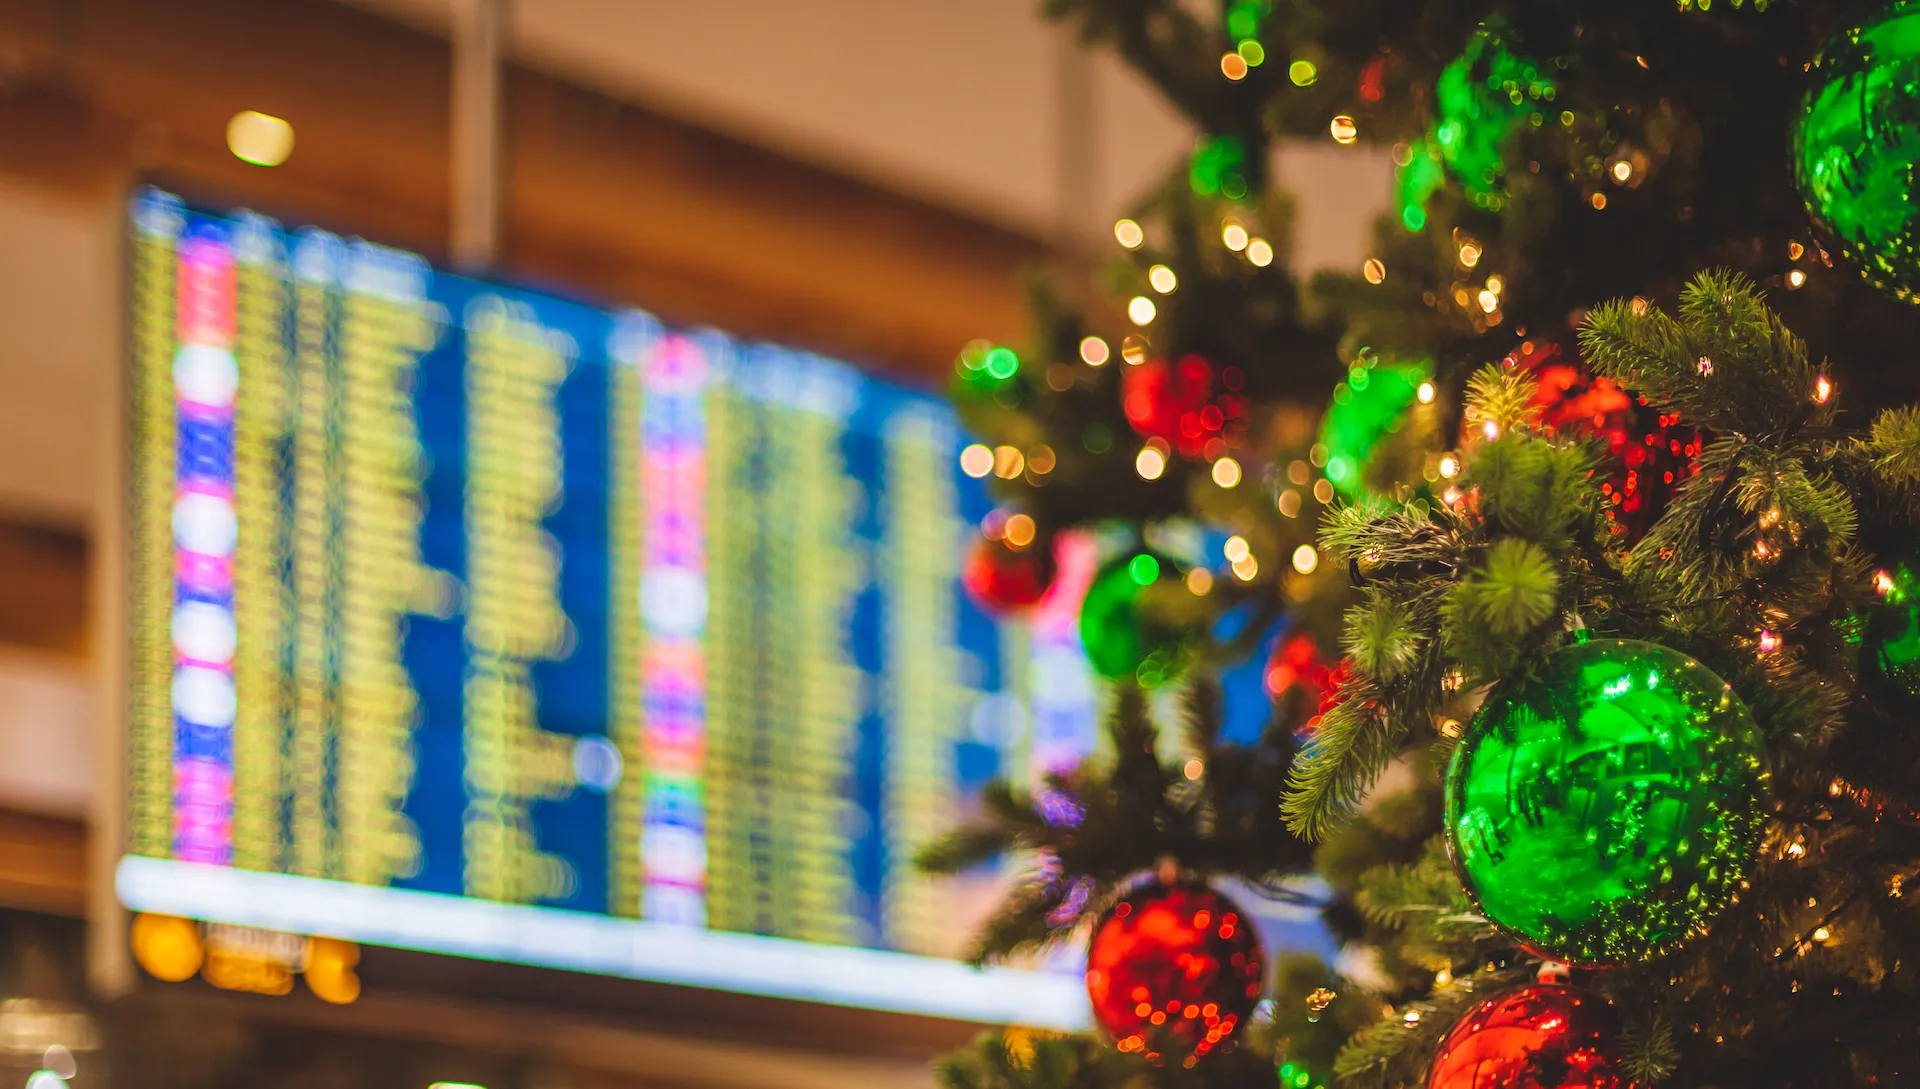 An unrecognizable airport location with a decorated Christmas Tree in the foreground an a flight departures display visible in the background.